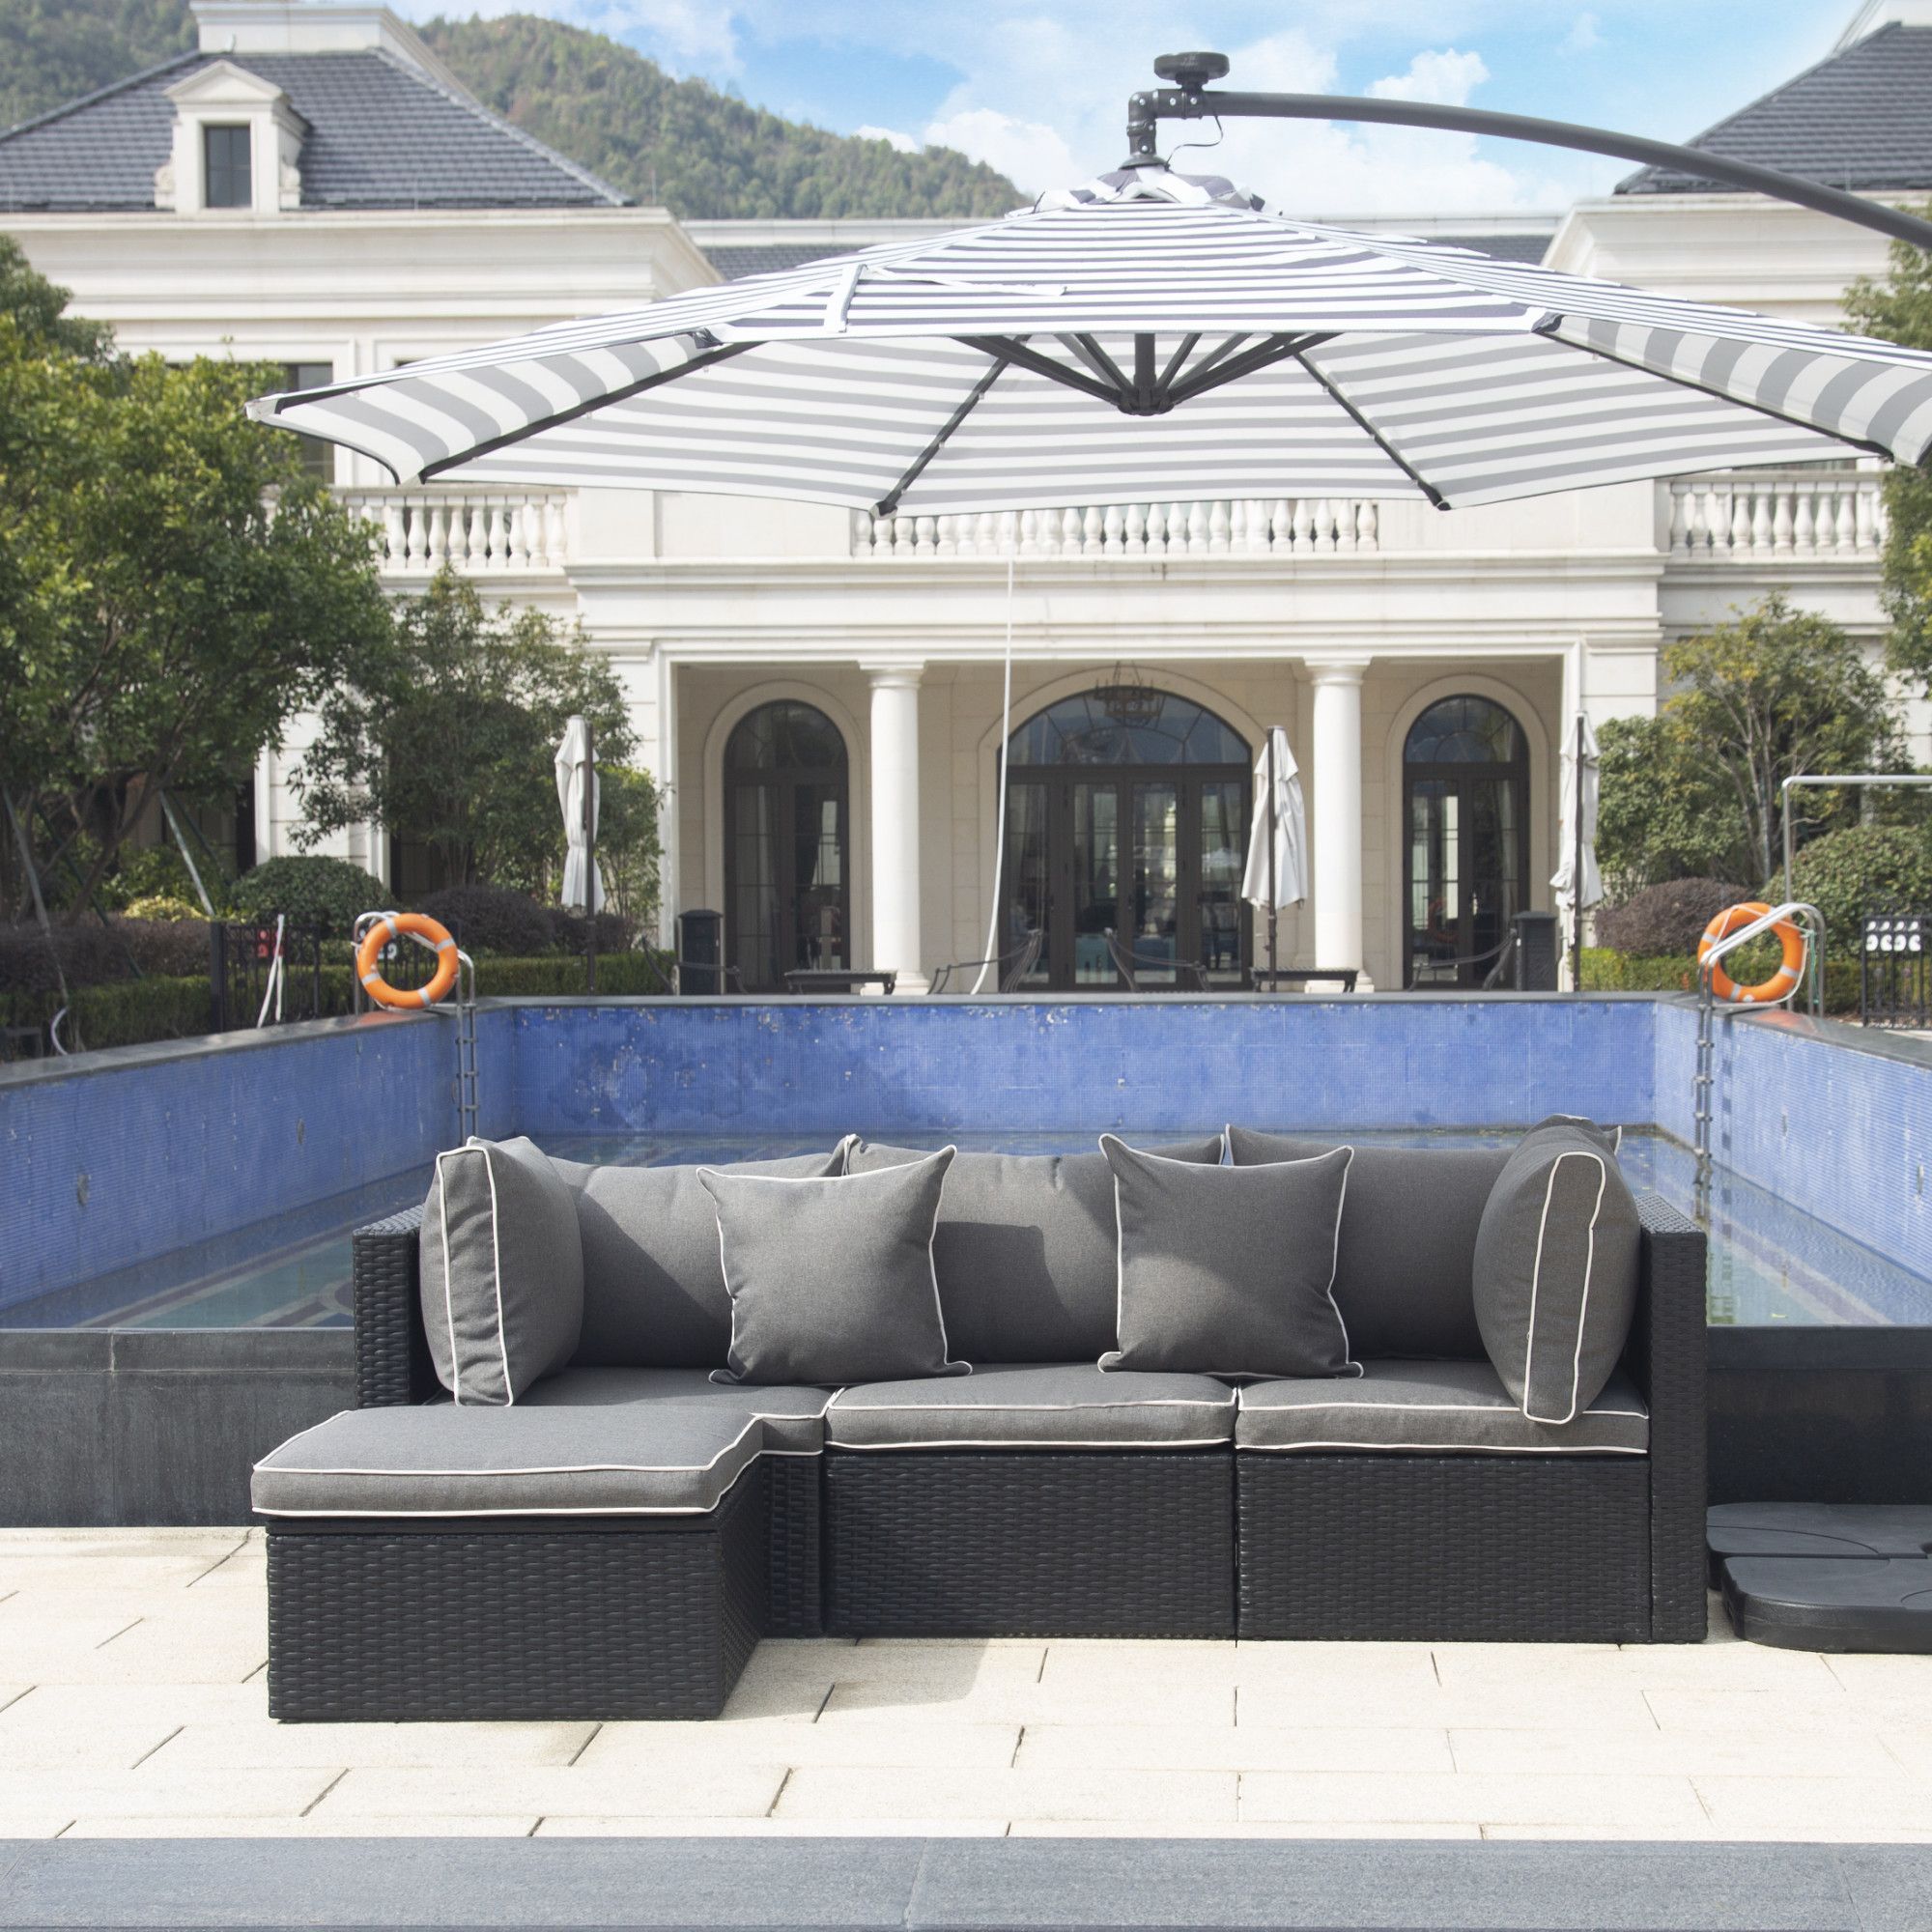 Widely Used Black Cushion Patio Conversation Sets Pertaining To Westintrends 4pc Outdoor Furniture Sectional Sofa Set Conversation Set (View 5 of 15)